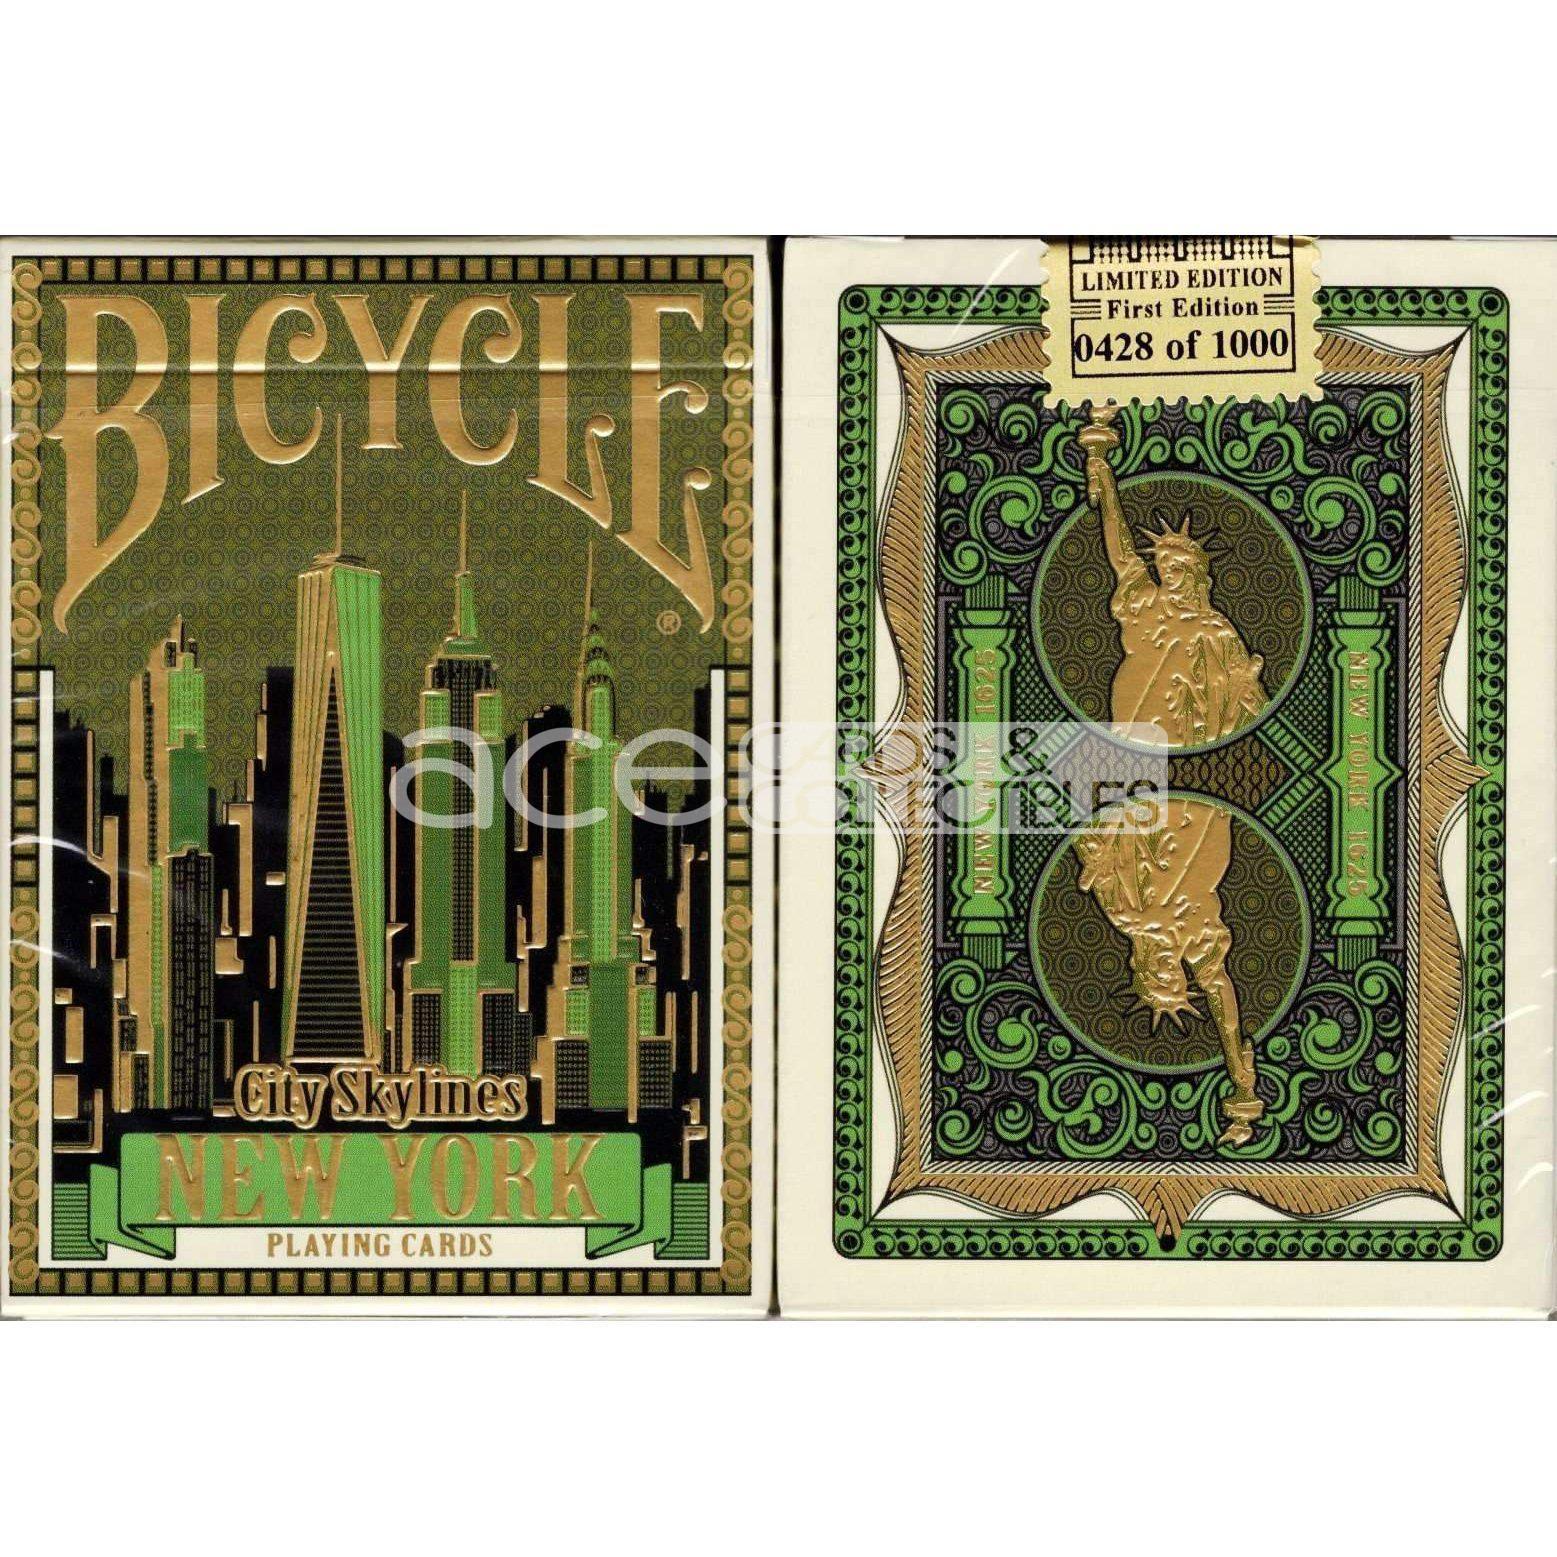 Bicycle City Skylines Limited Edition Numbered Seals Playing Cards-New York-United States Playing Cards Company-Ace Cards & Collectibles